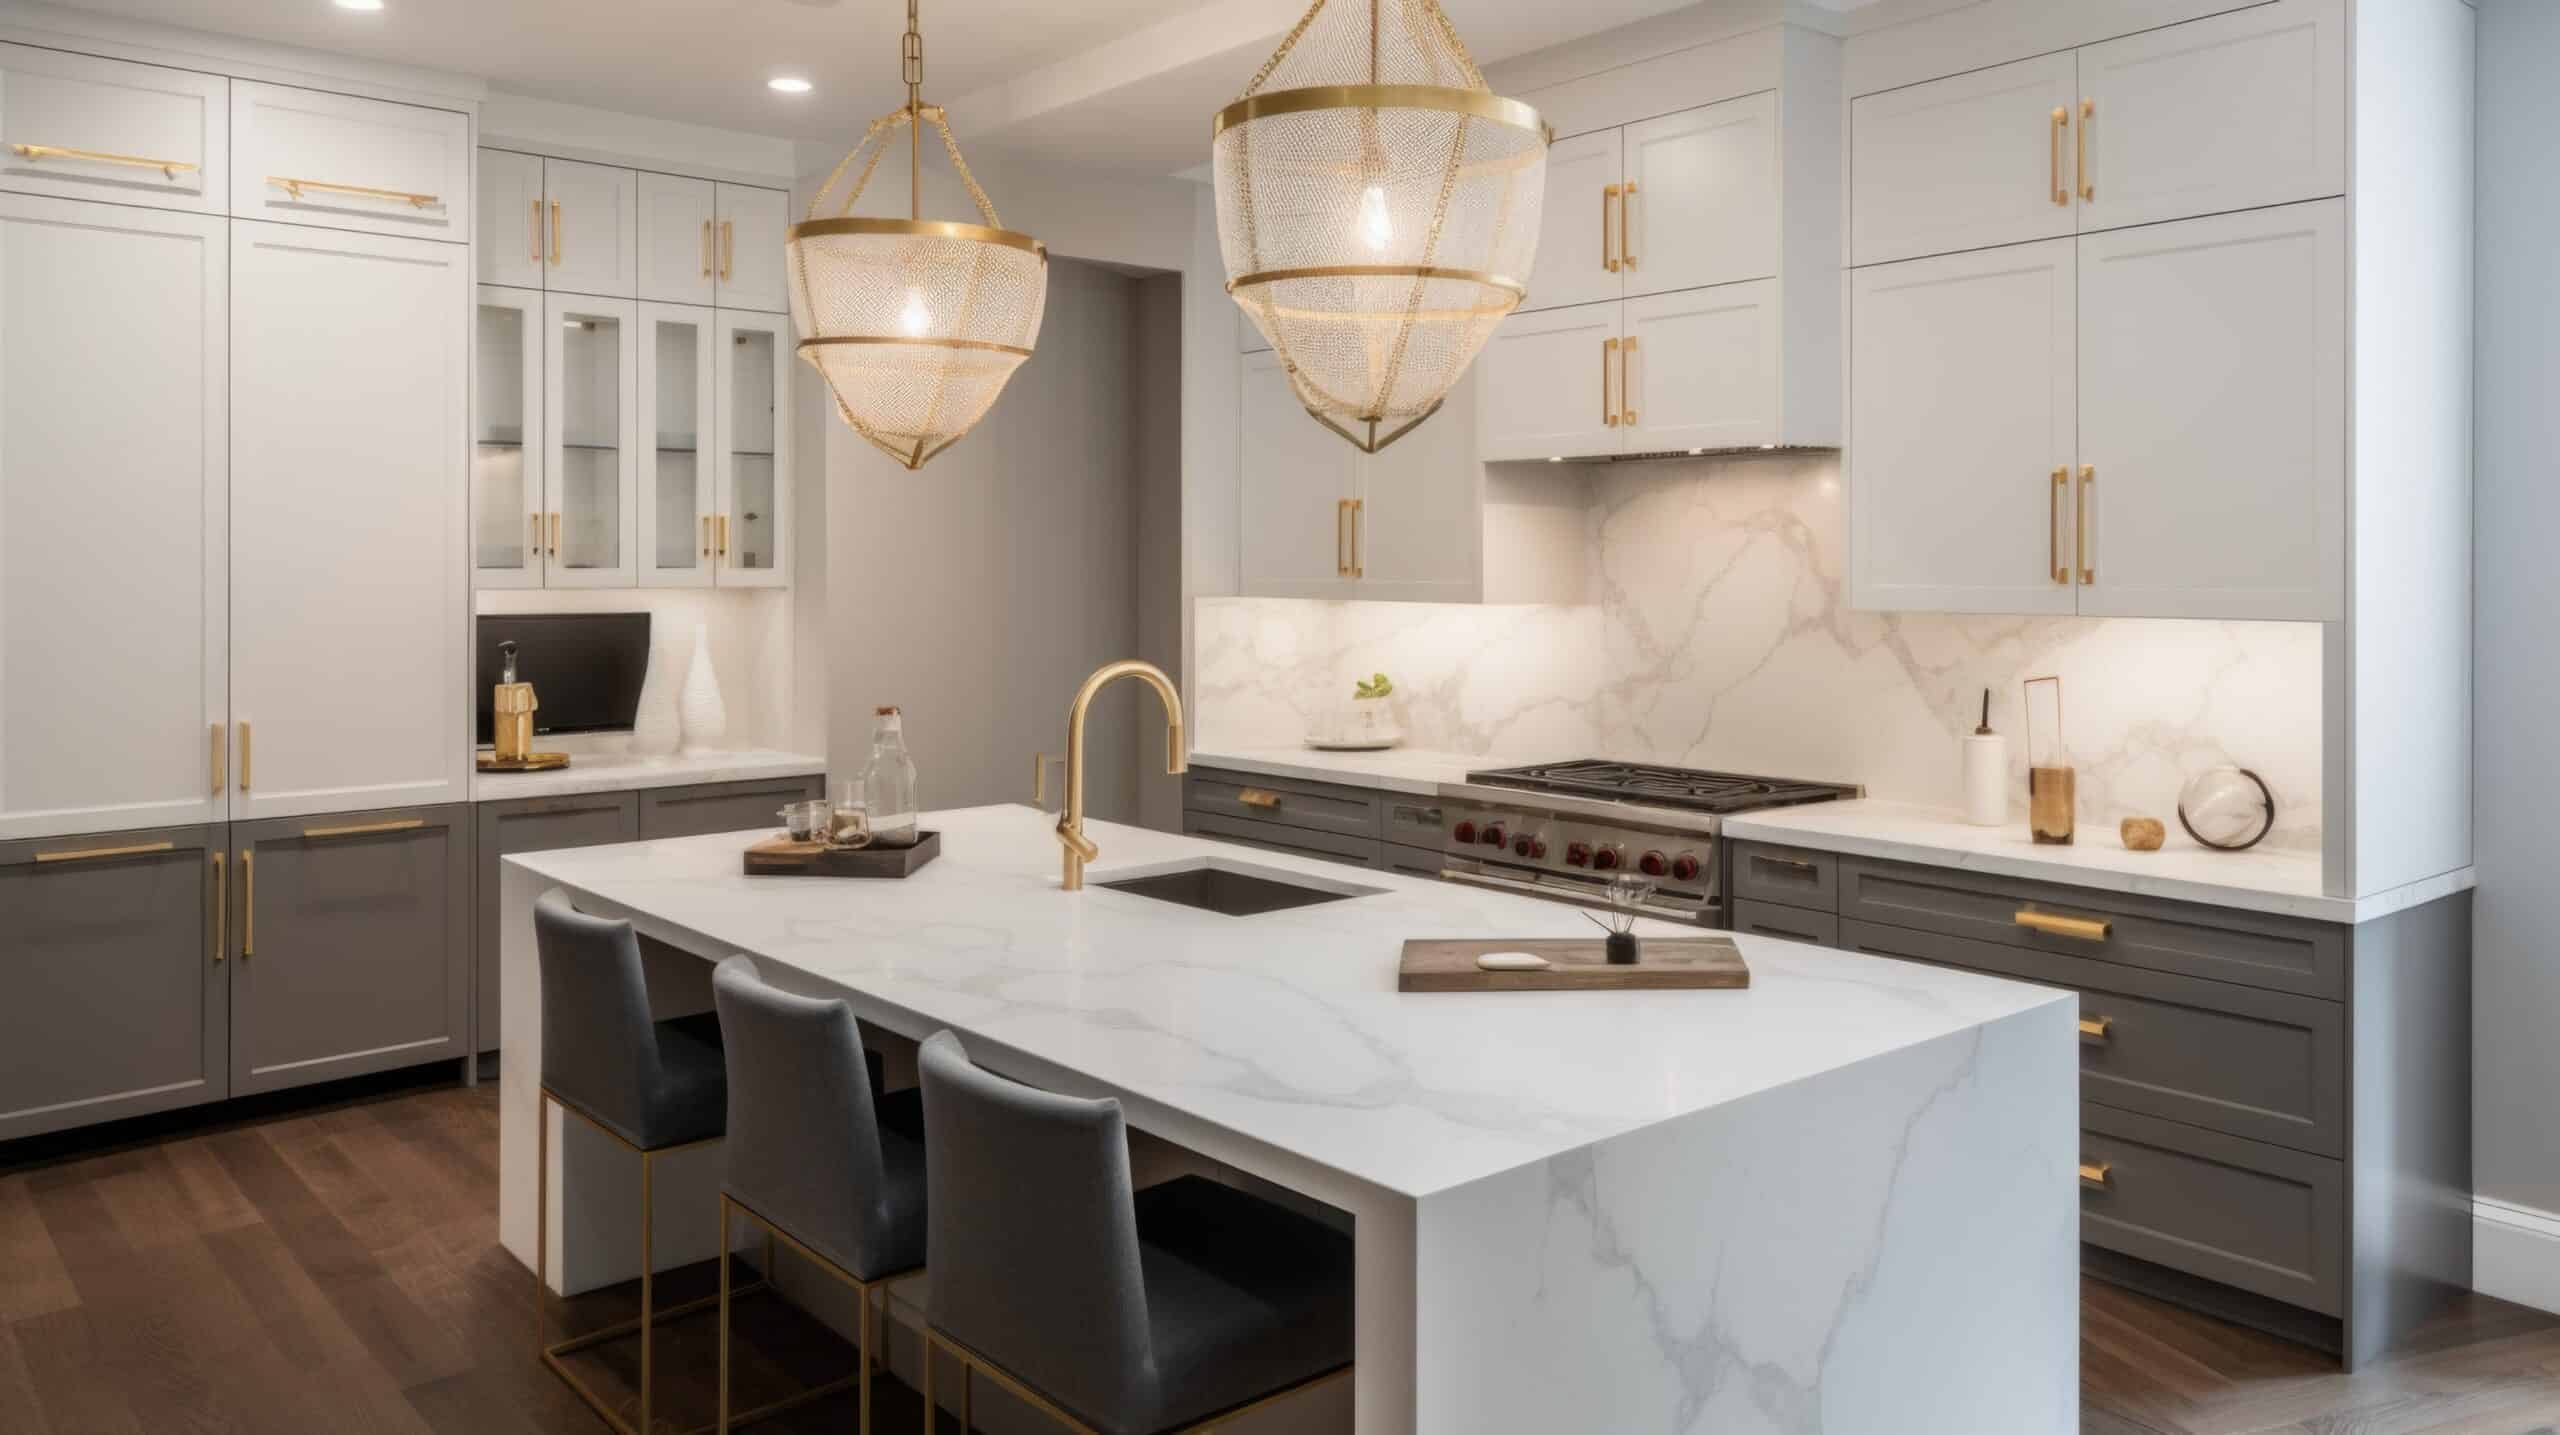 Interior design of Kitchen in Transitional style with Marble Backsplash decorated with Brass Hardware, Wood Flooring material. Modern architecture. Generative AI AIG24.